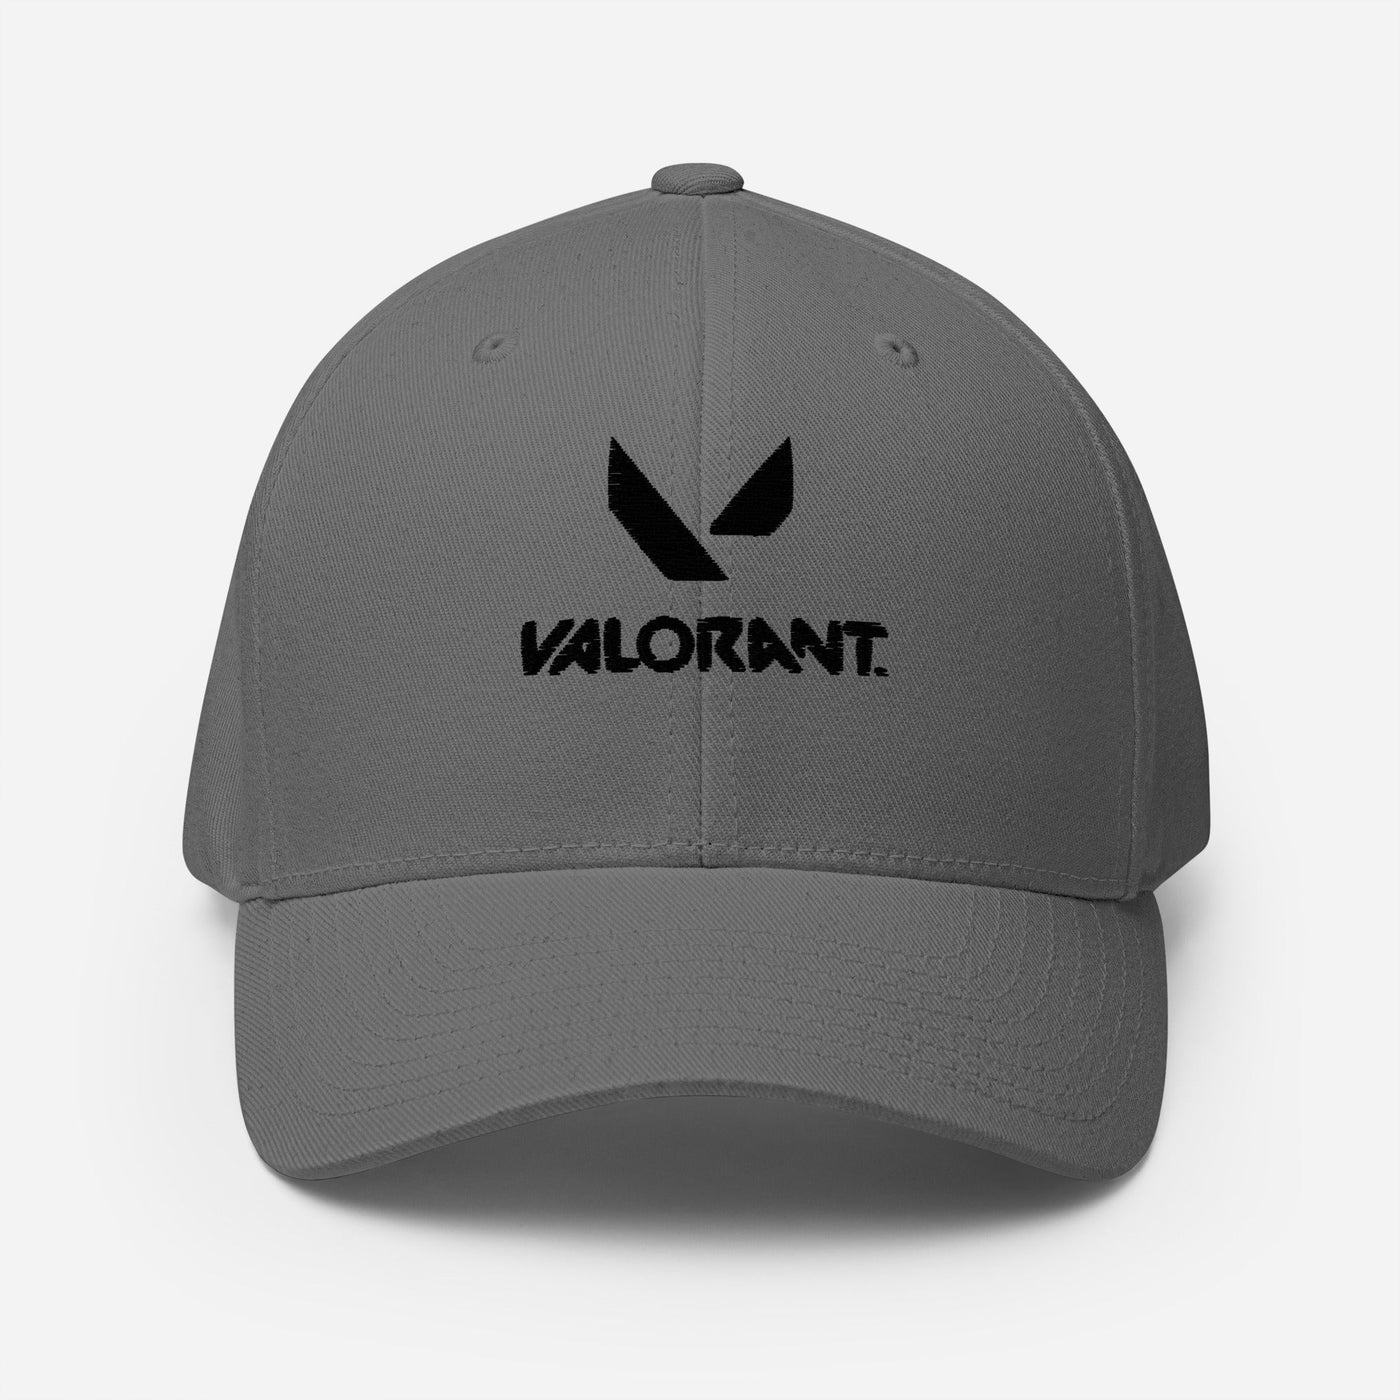 Valorant Embroidered flex-fit closed back hat Gapo Goods